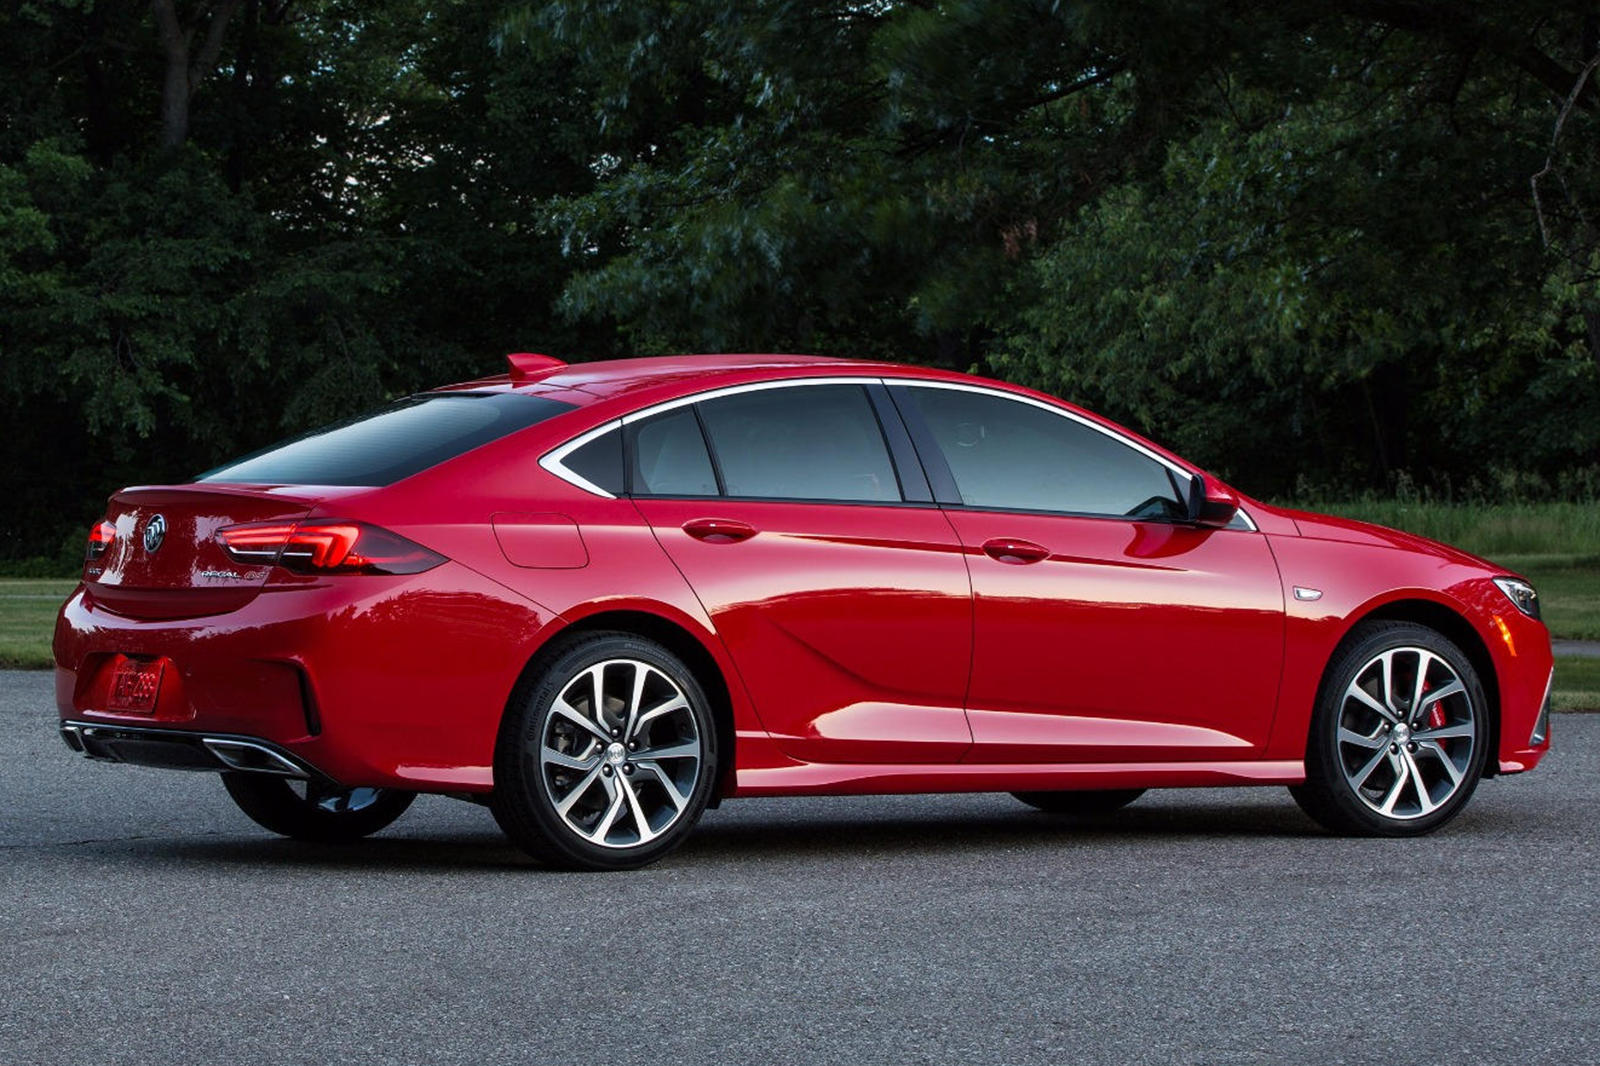 2020 Buick Regal GS: Review, Trims, Specs, Price, New Interior Features